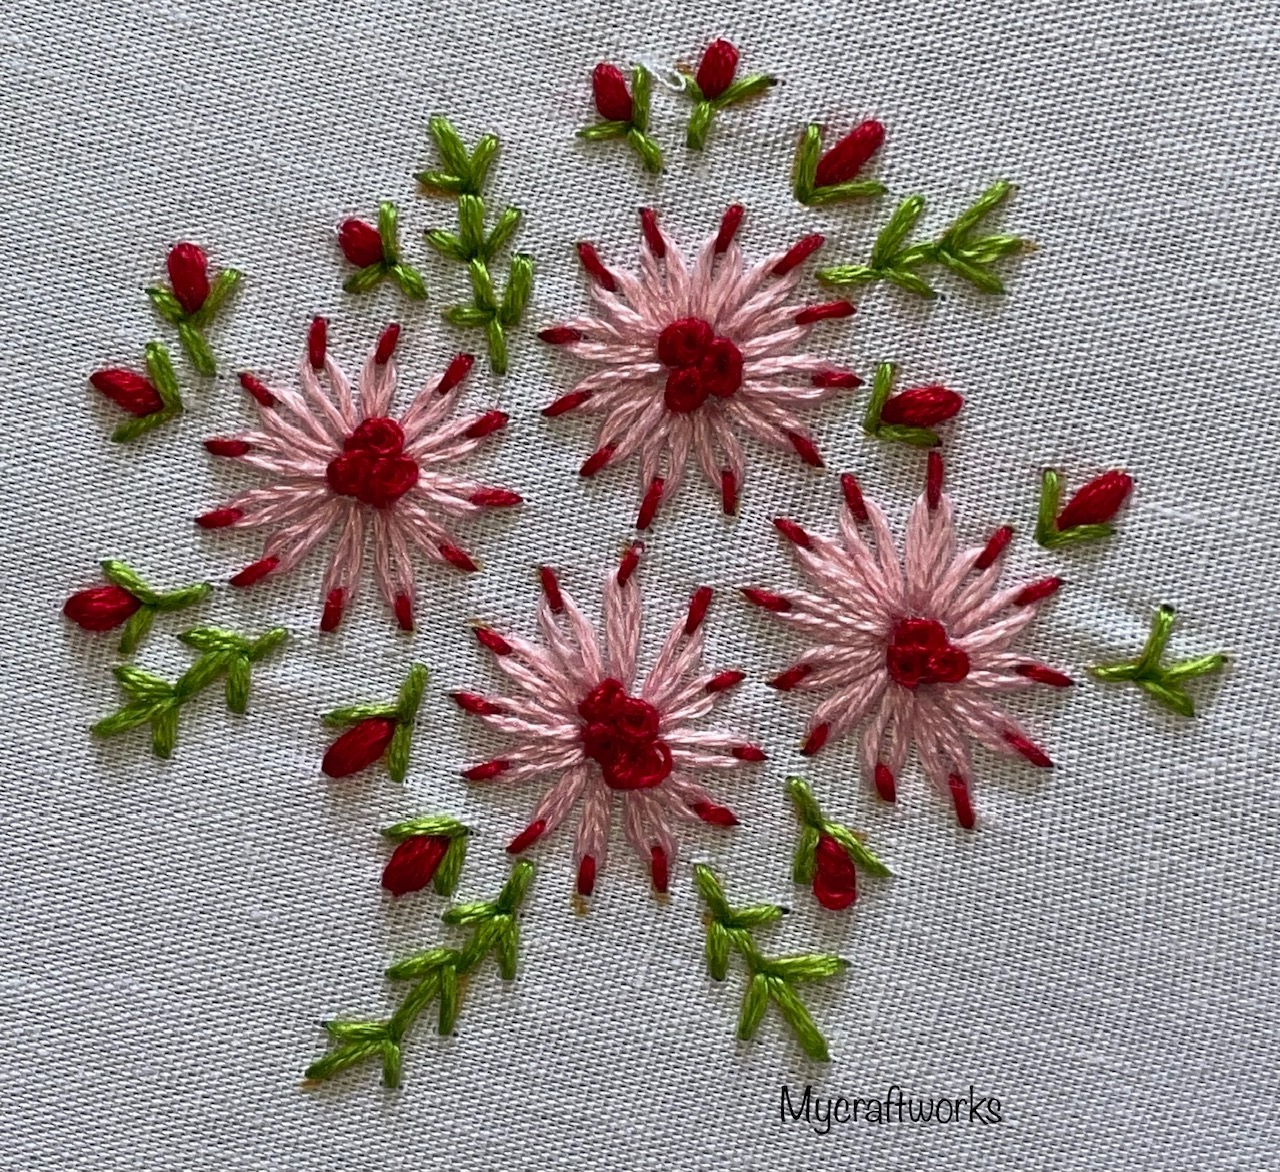 MY CRAFT WORKS: Daisy flowers embroidery Design